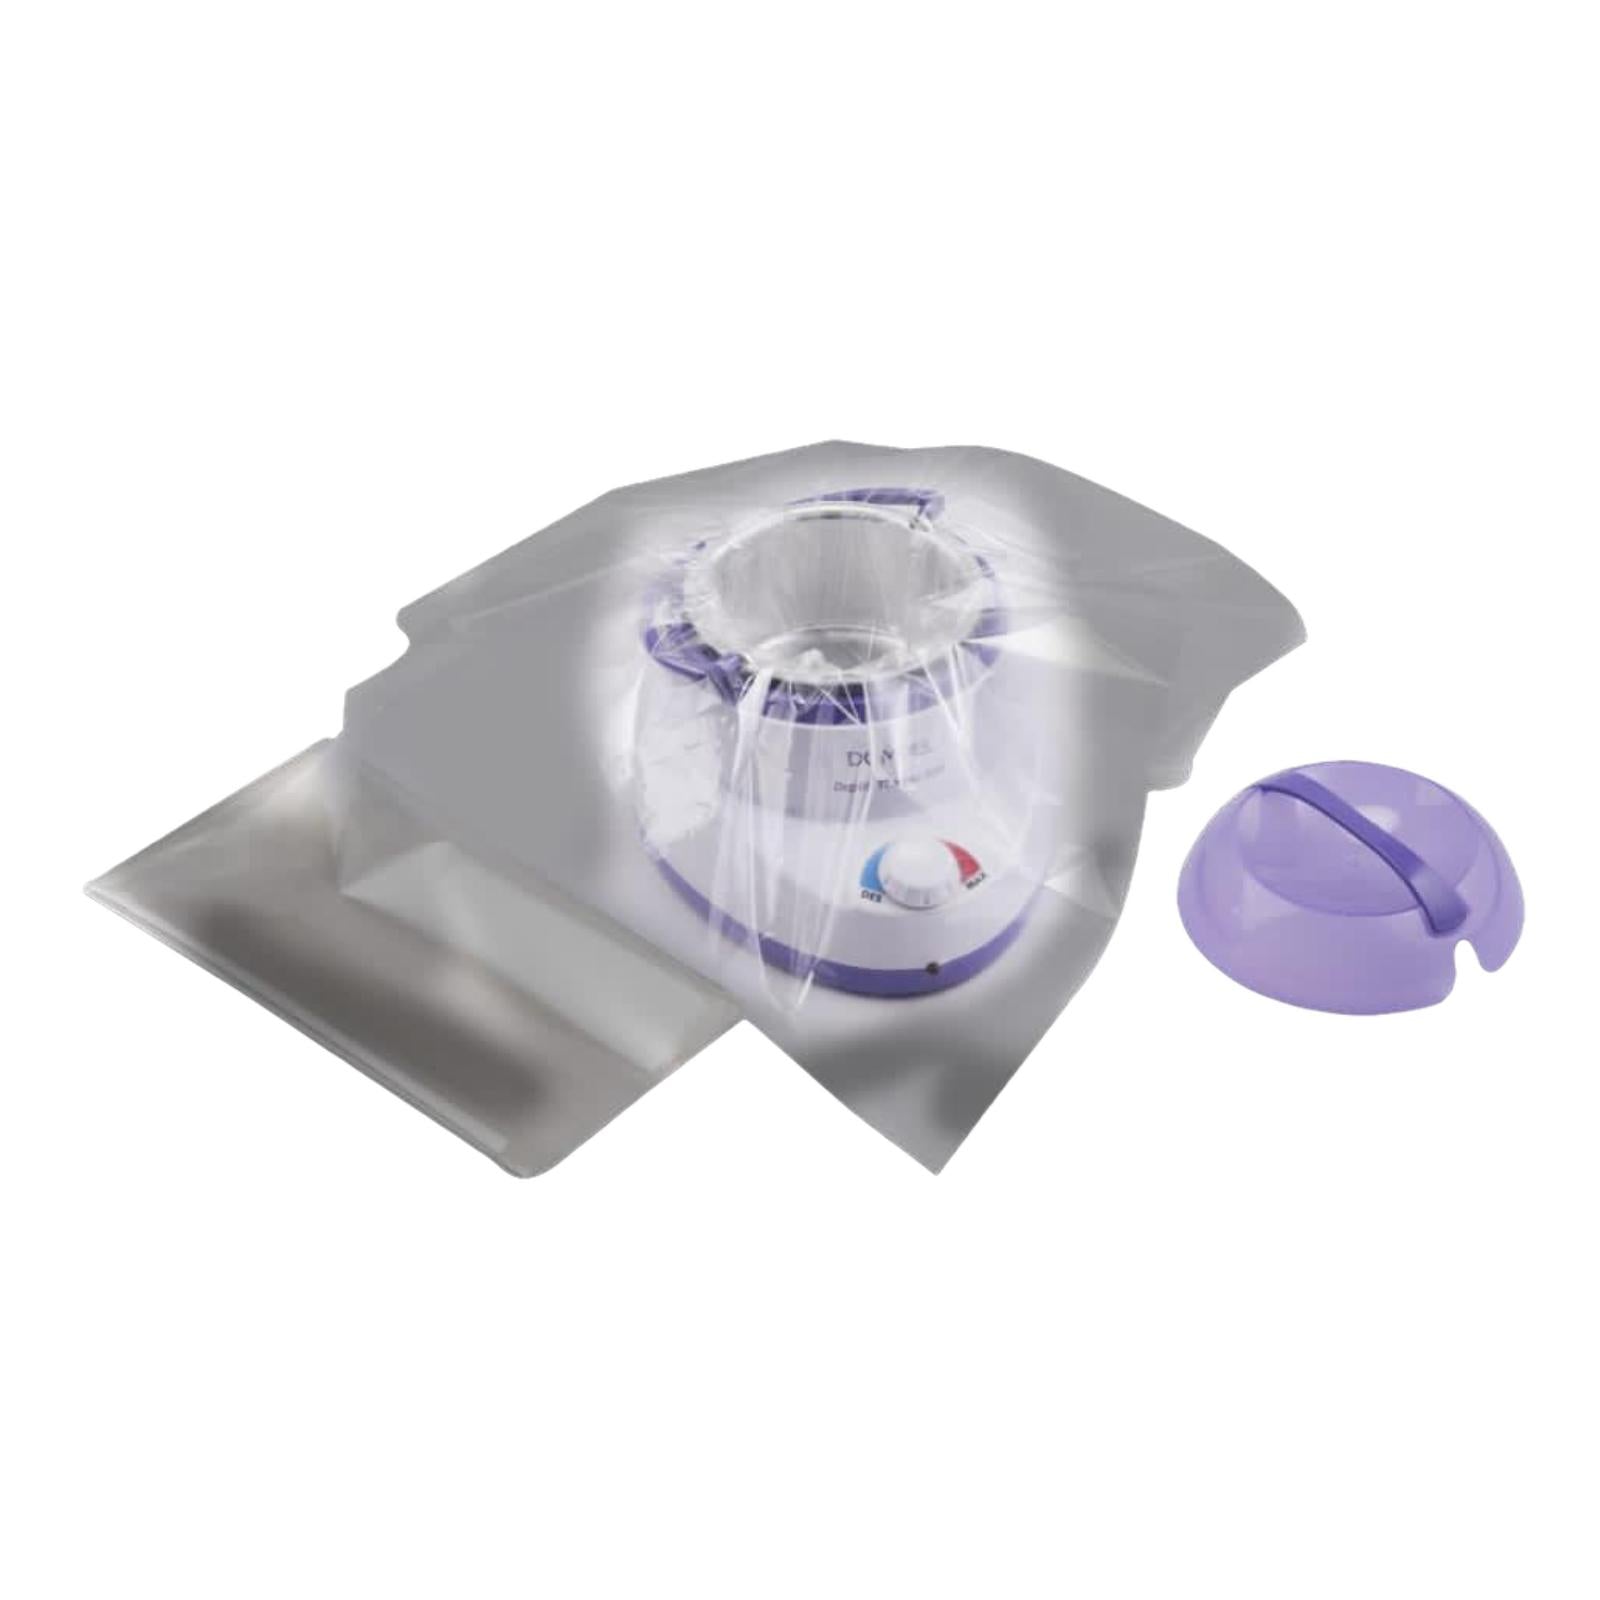 Dompel wax warmer with plastic refill, lid, and additional accessories, showcasing a complete waxing kit